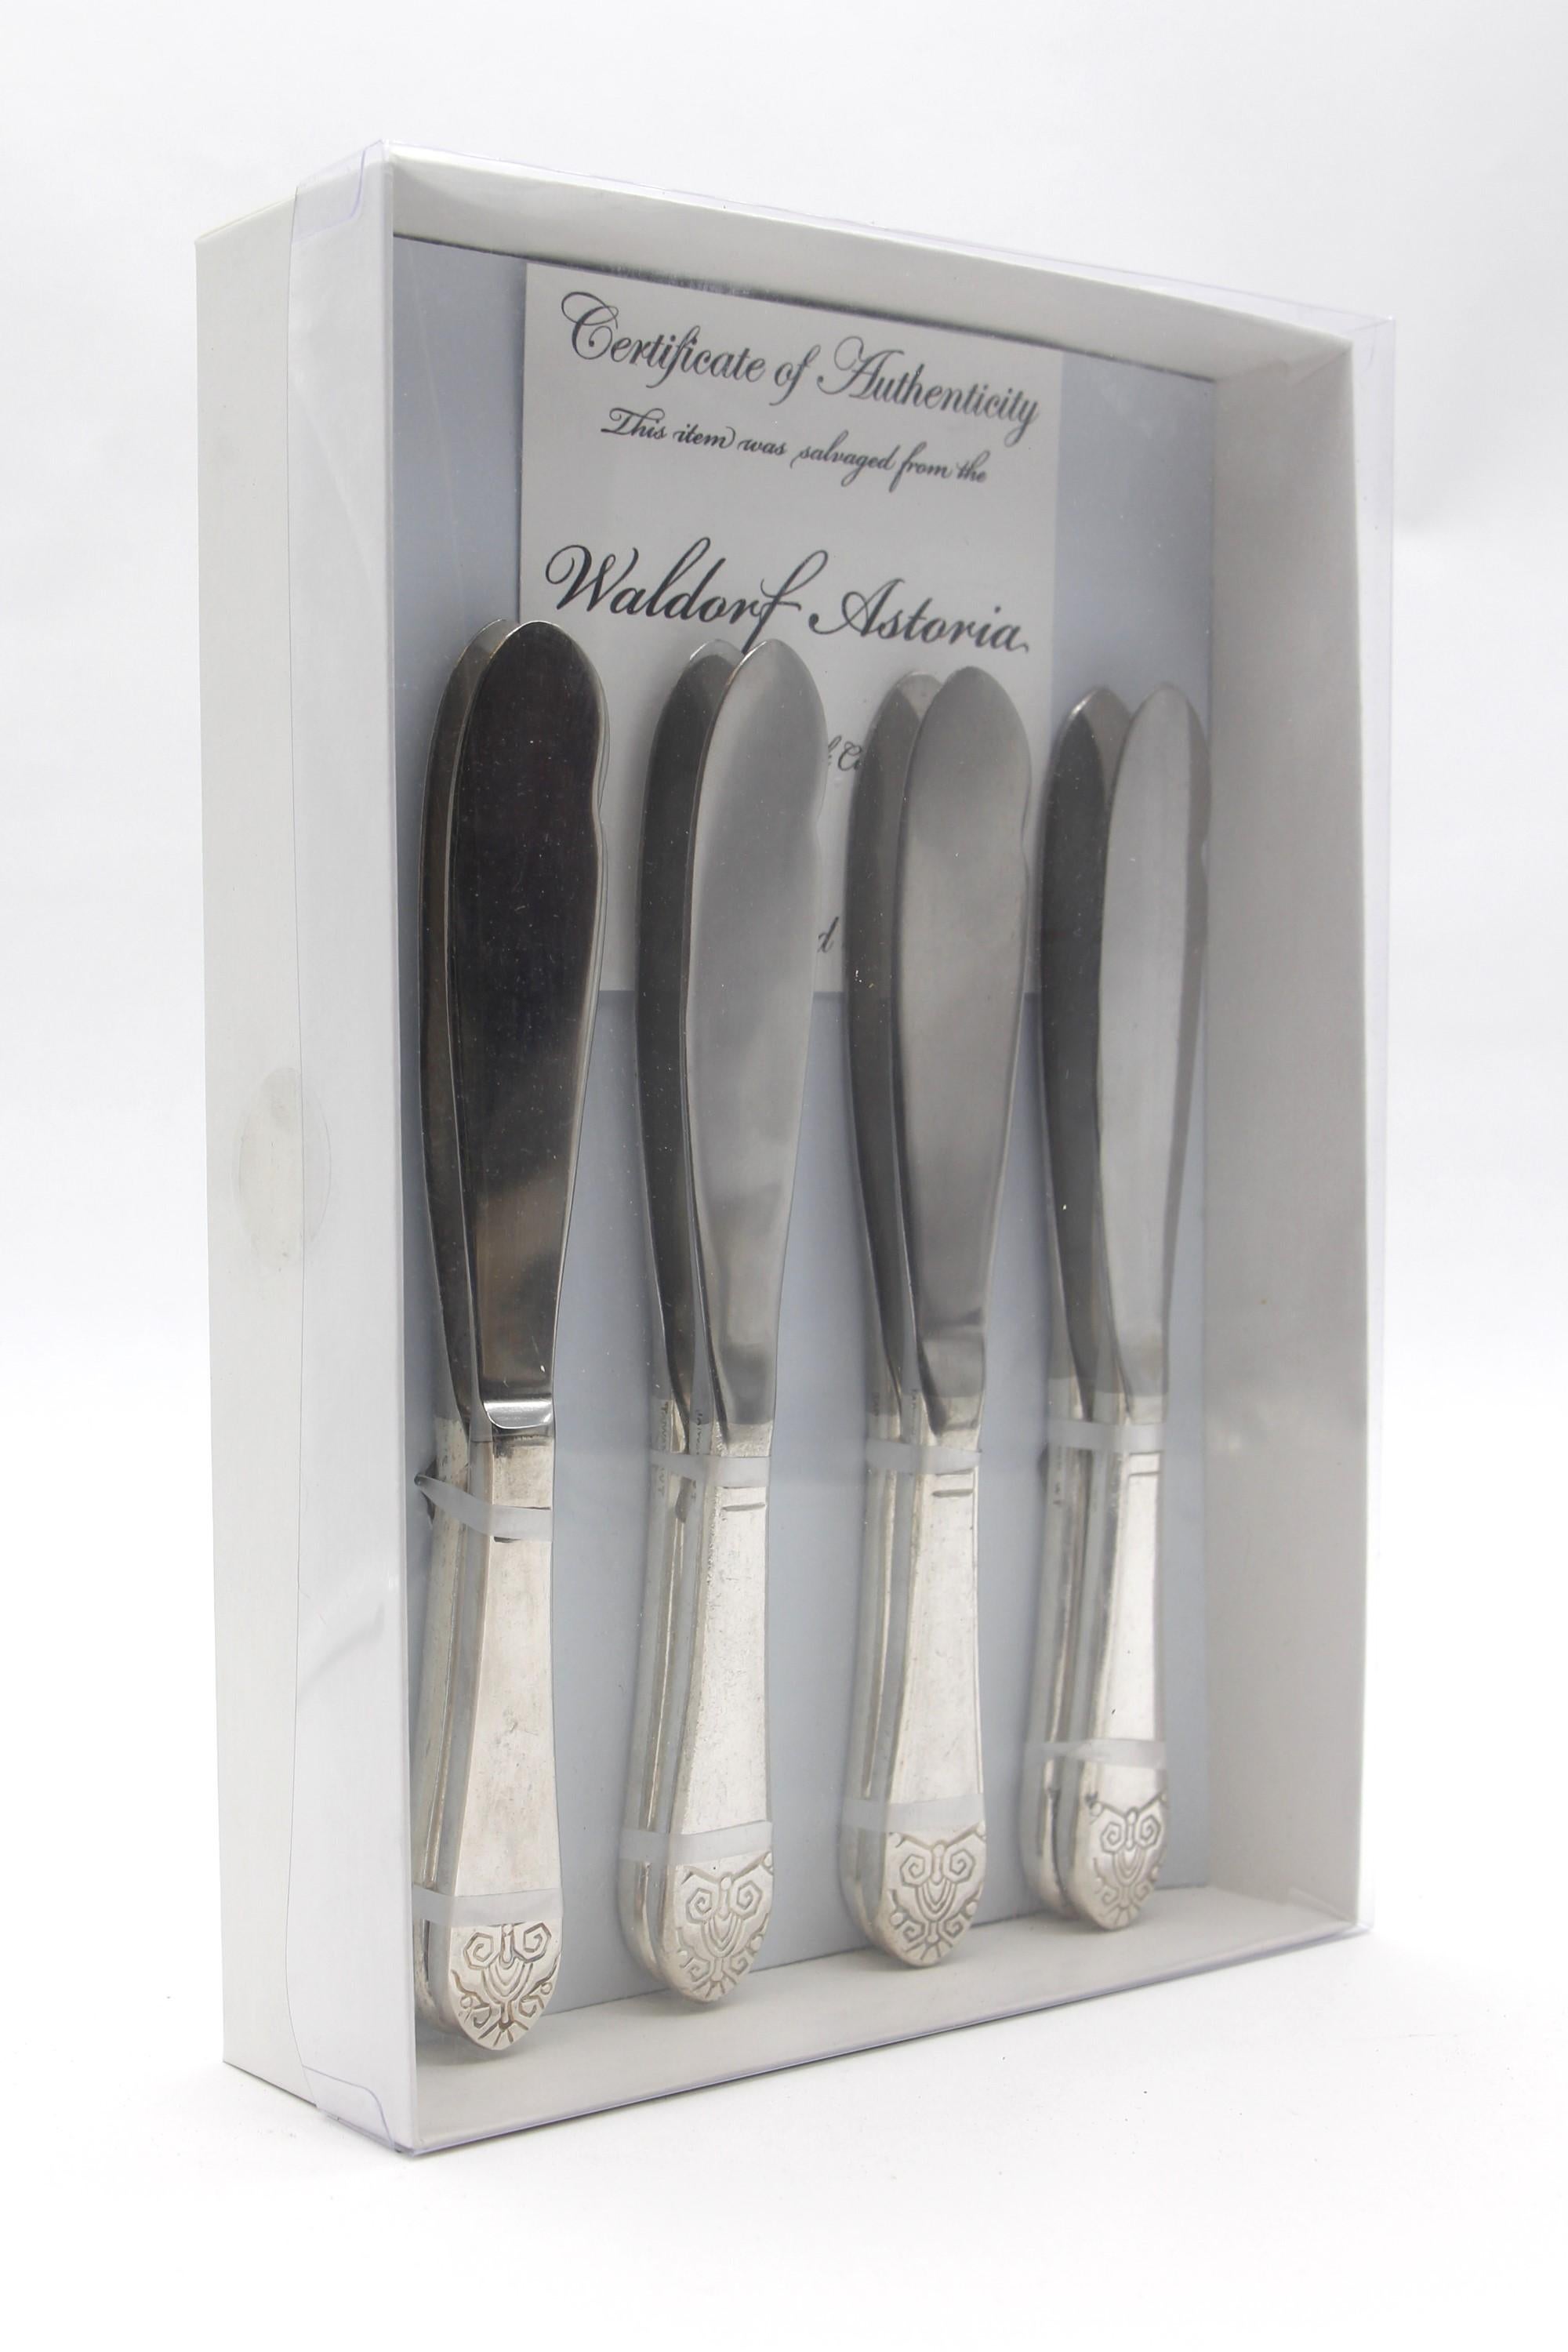 Silver plated steel 8 piece fish knife flatware set. Manufactured by Oneida wit the original 1931 Waldorf Astoria logo on the handle. These pieces were used in the New York City Waldorf Astoria Hotel. All 8 pieces are stamped Waldorf Astoria on the